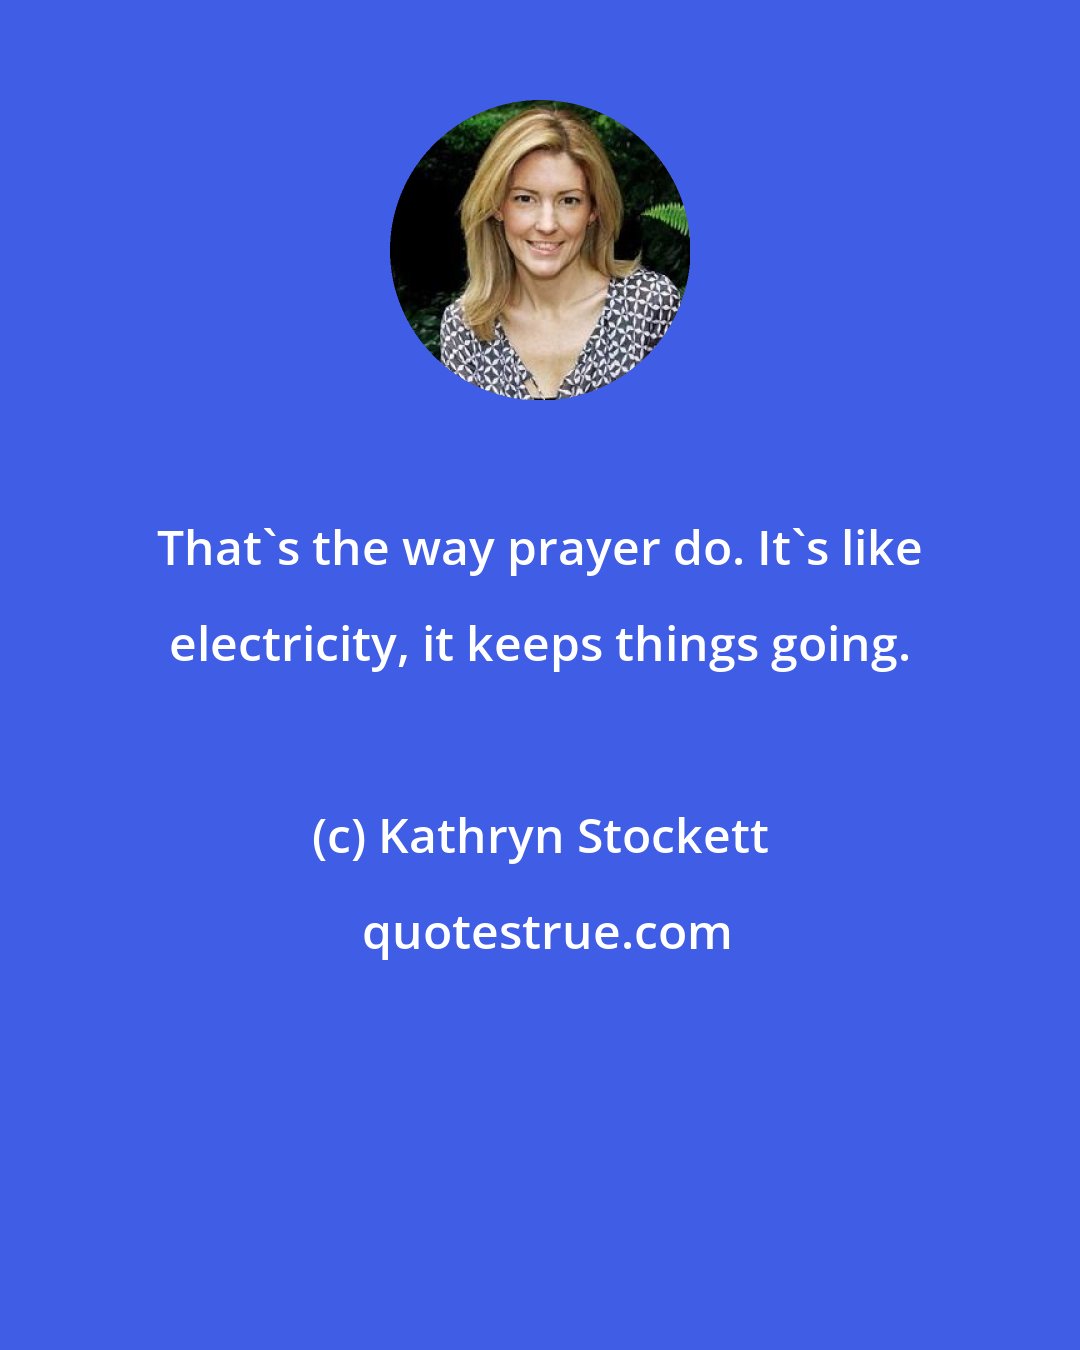 Kathryn Stockett: That's the way prayer do. It's like electricity, it keeps things going.